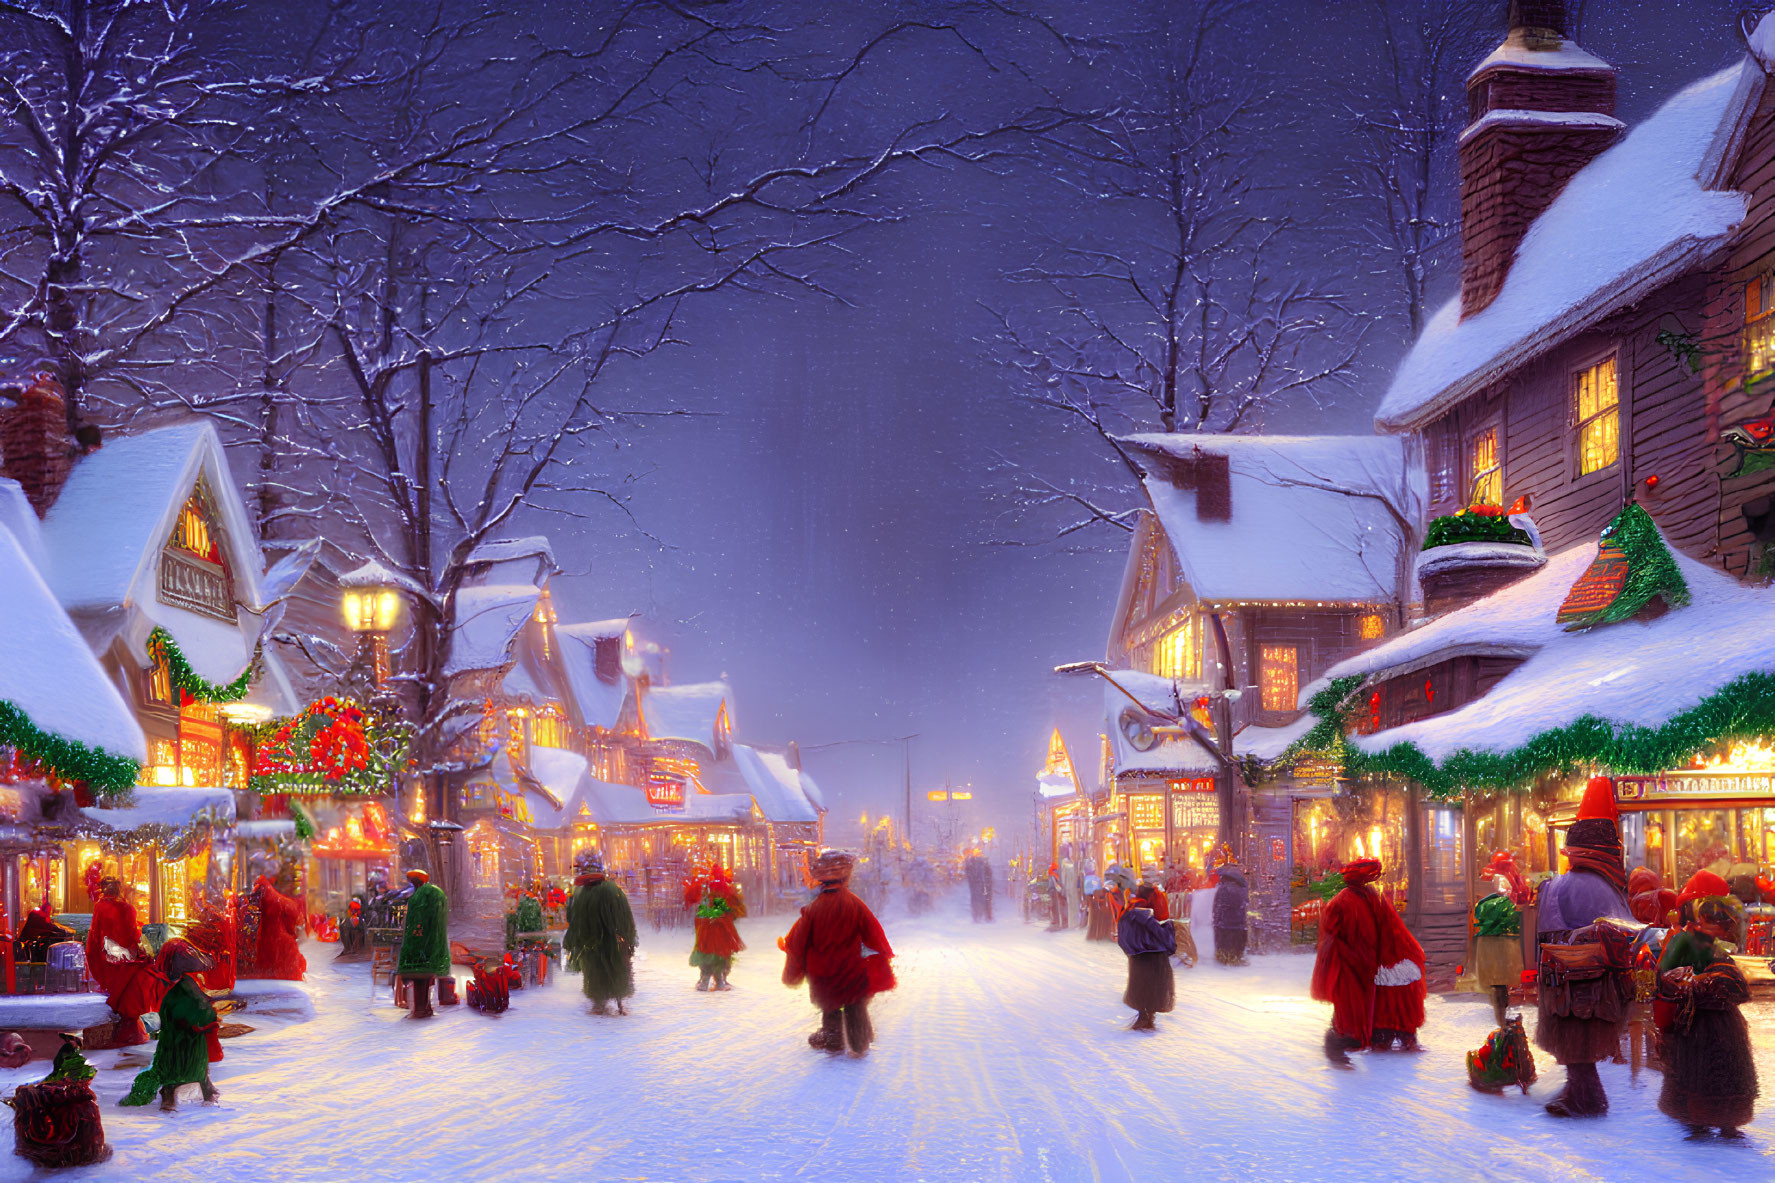 Snow-covered village street at twilight with festive holiday decorations and people in winter attire creating a warm Christmas atmosphere